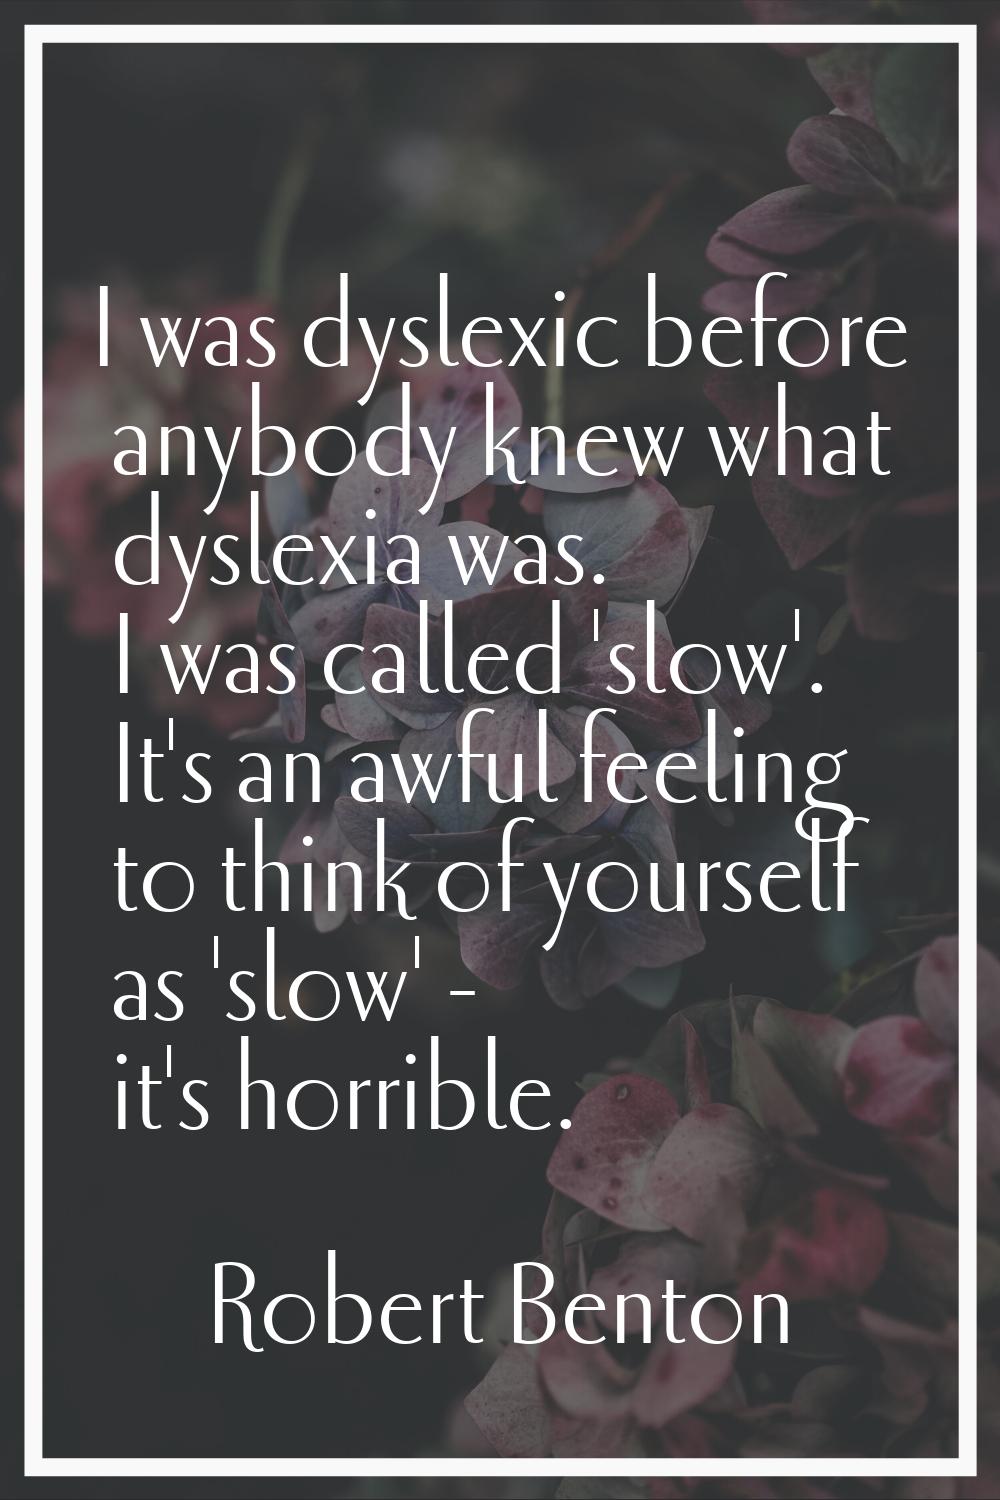 I was dyslexic before anybody knew what dyslexia was. I was called 'slow'. It's an awful feeling to